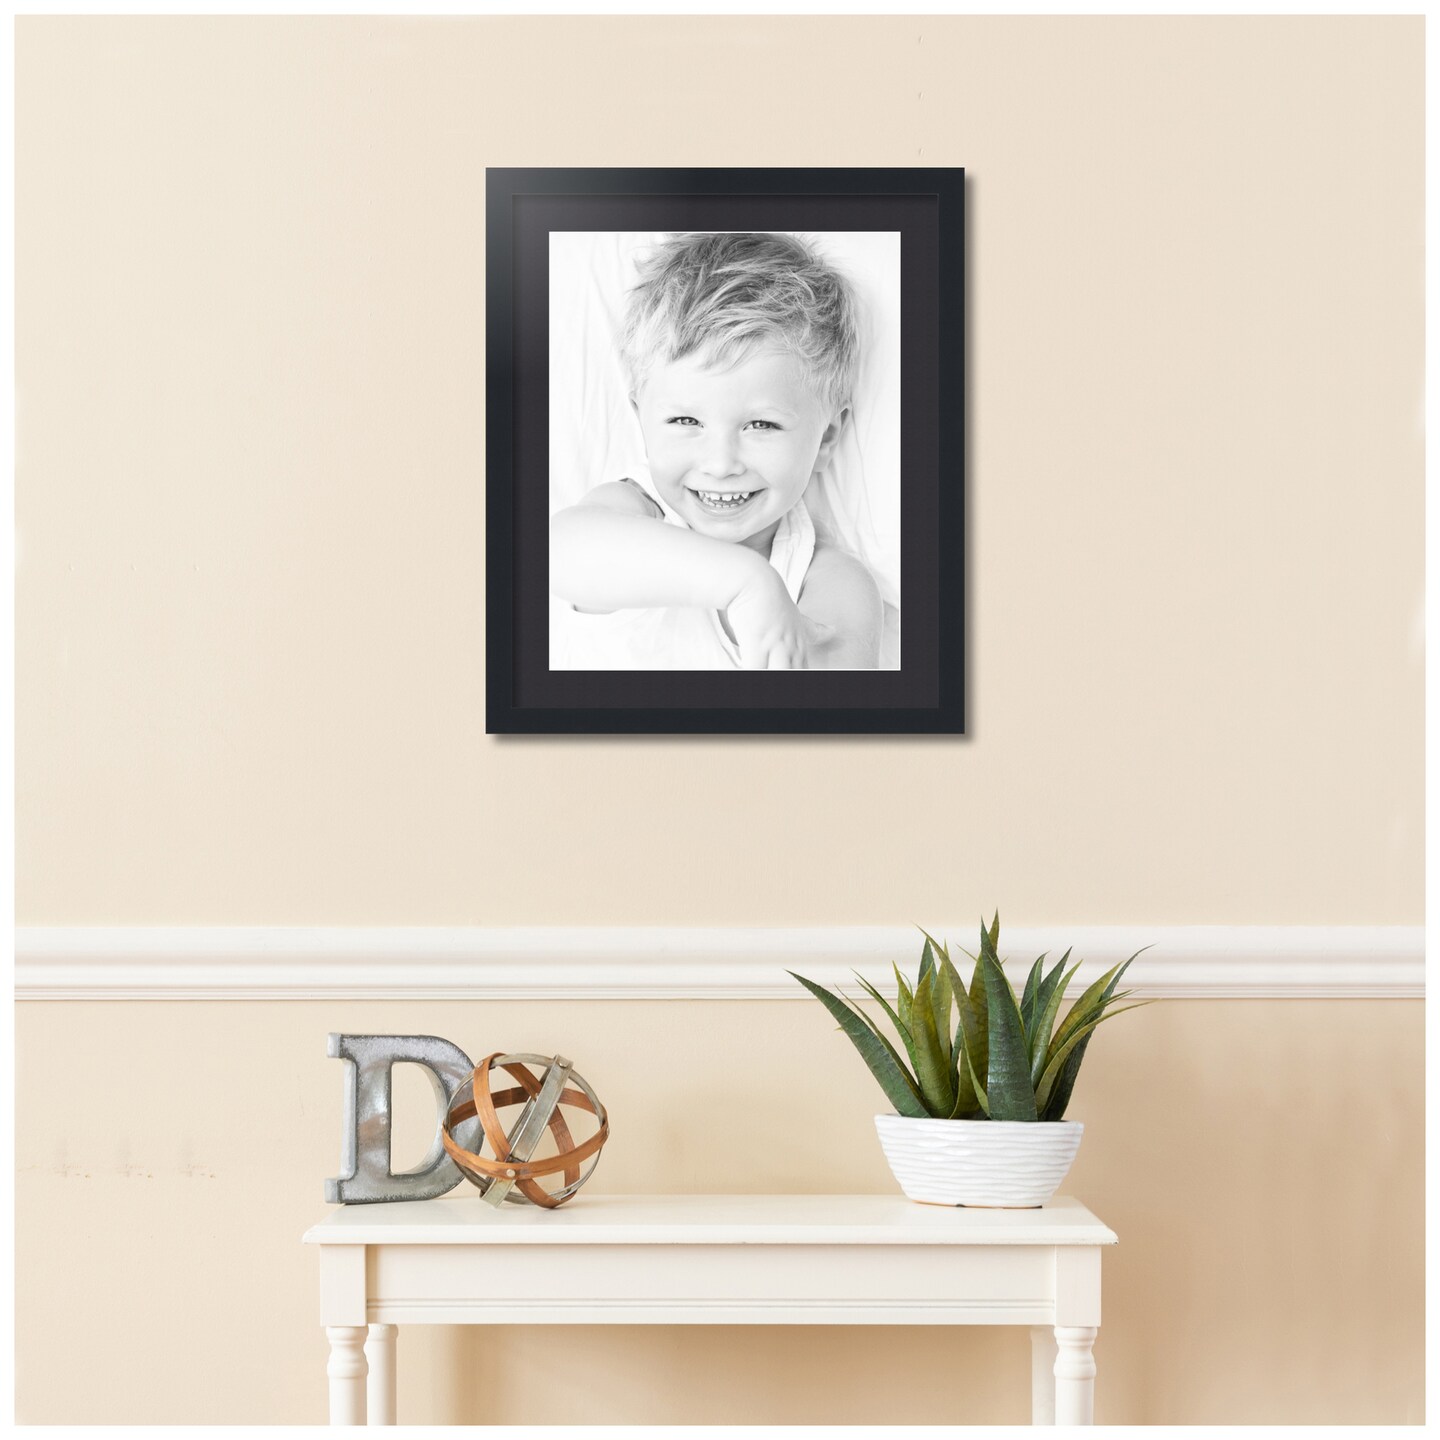 Gallery Solutions 20x24 Matted to 16x20 Wall Mount Gallery Picture Frame  Set, Set of 2, White 